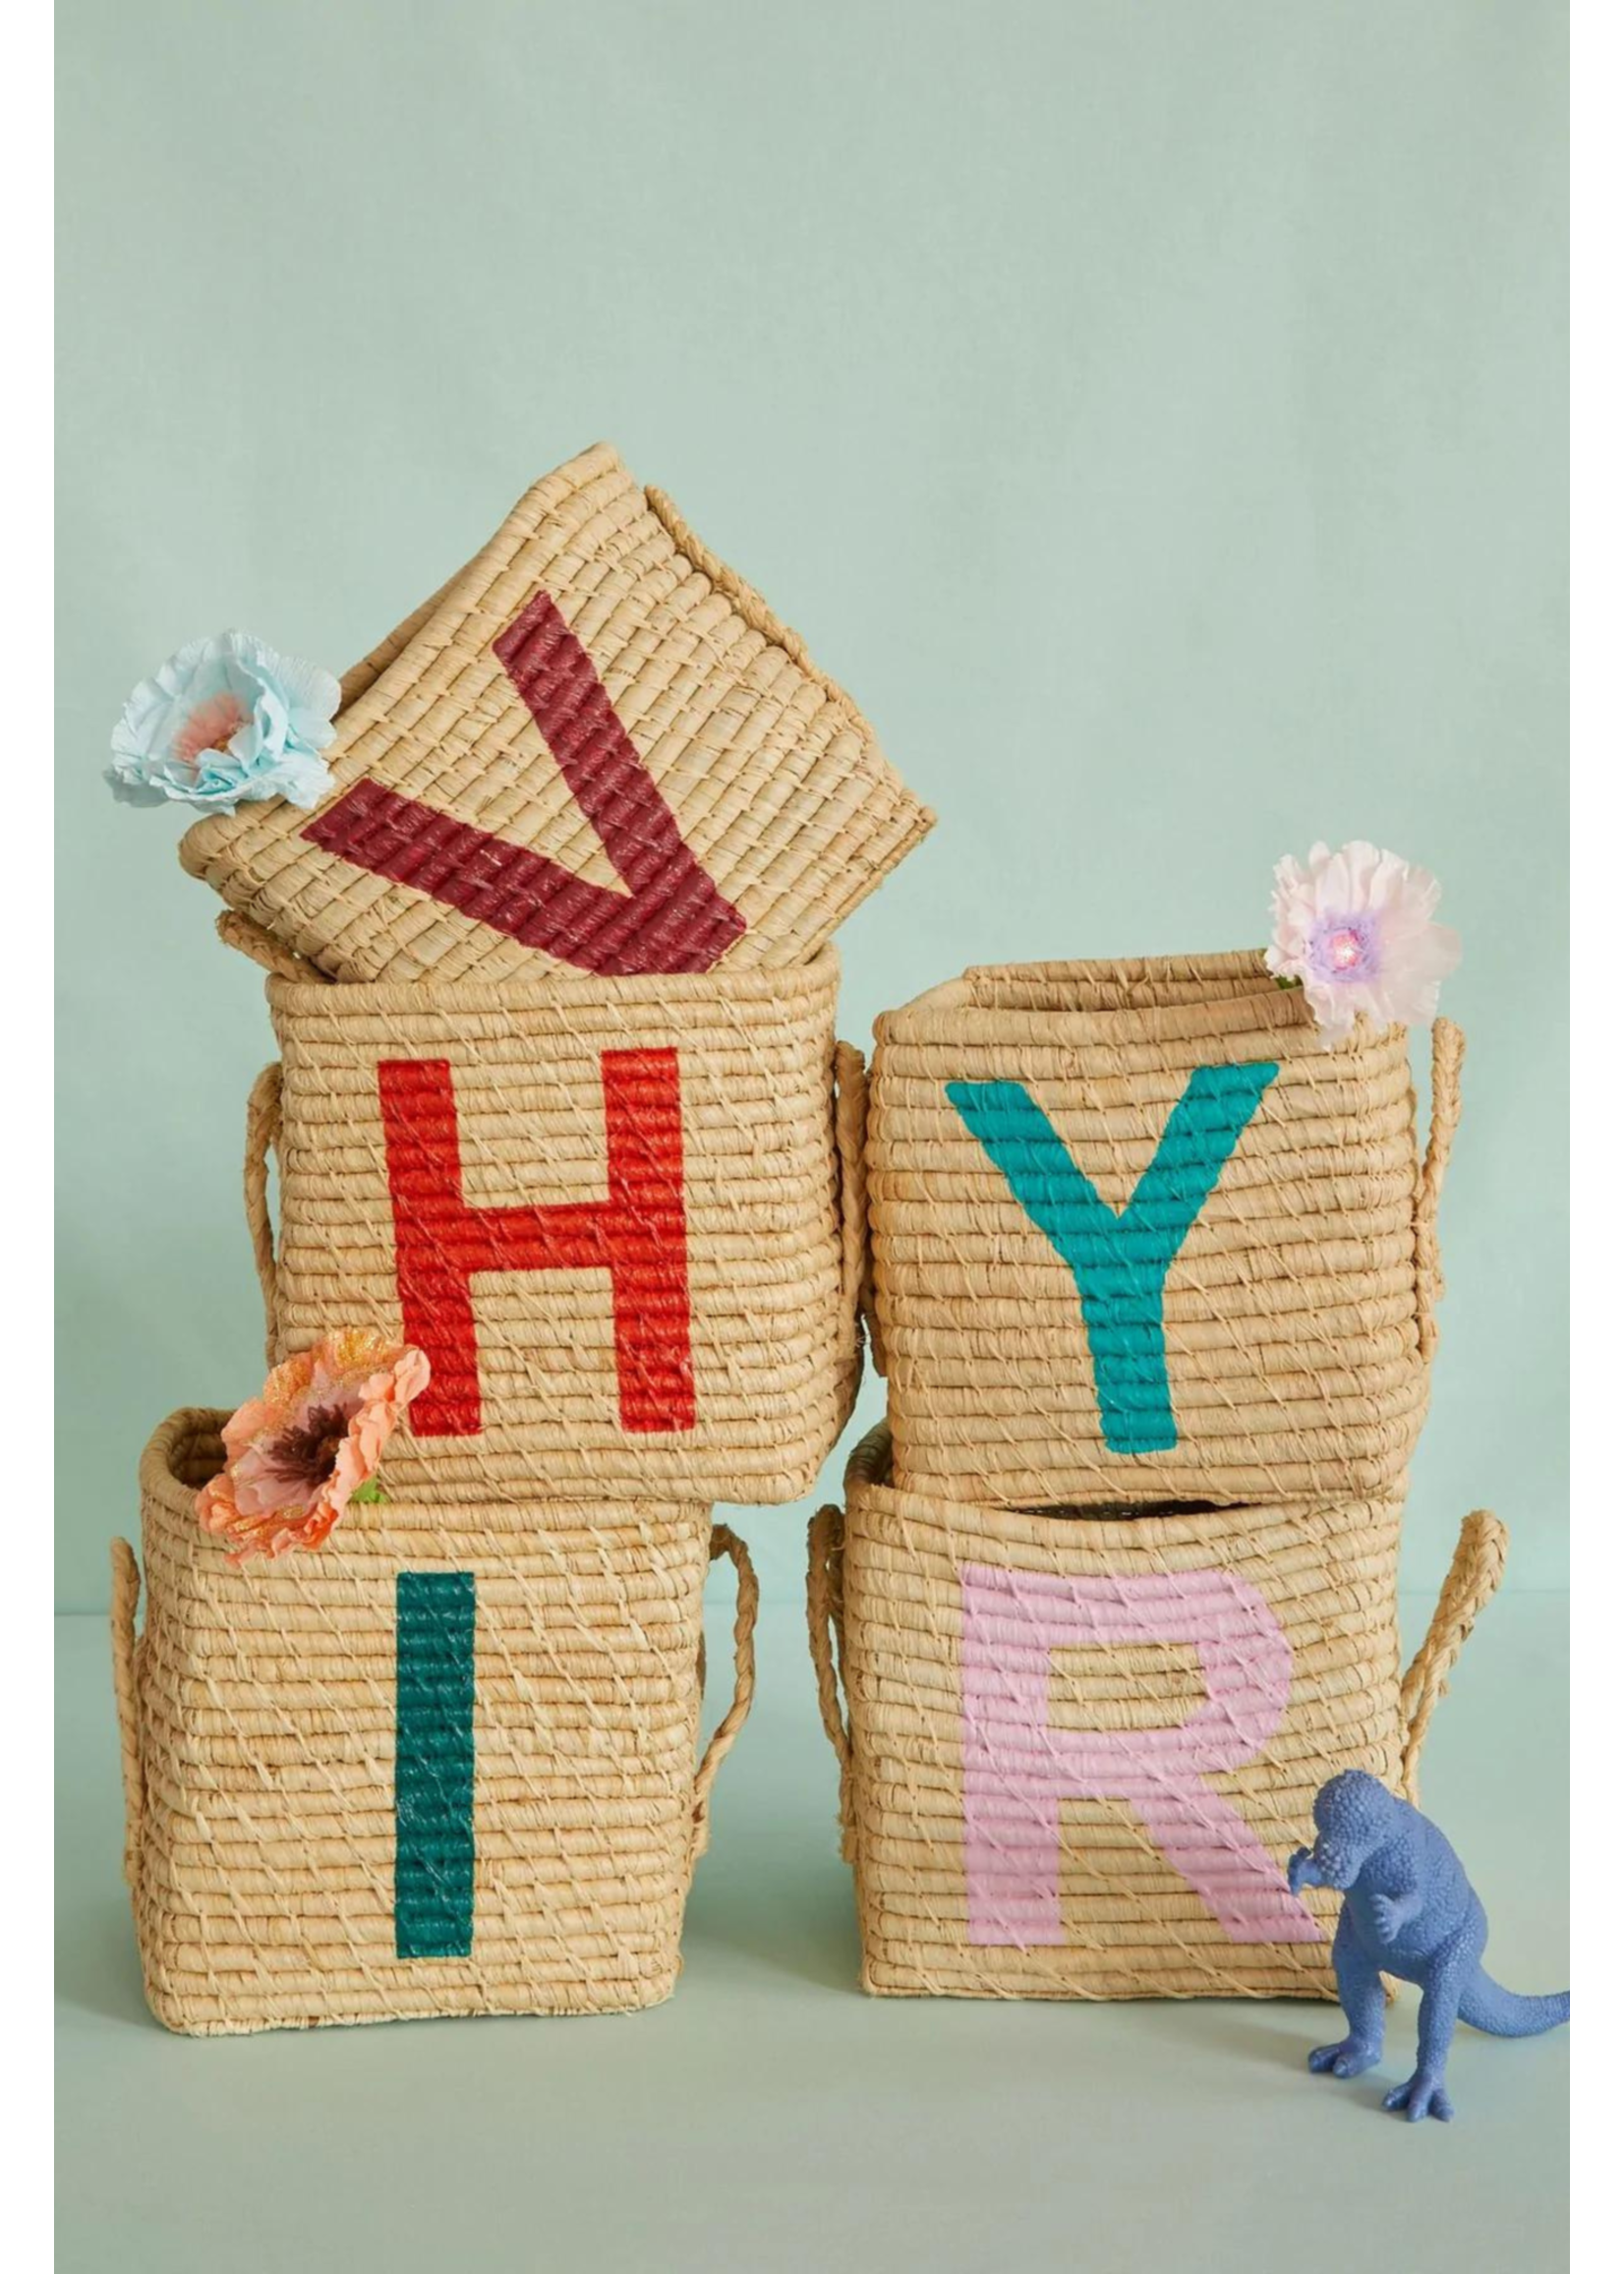 Rice Mand raffia square basket with painted letter X